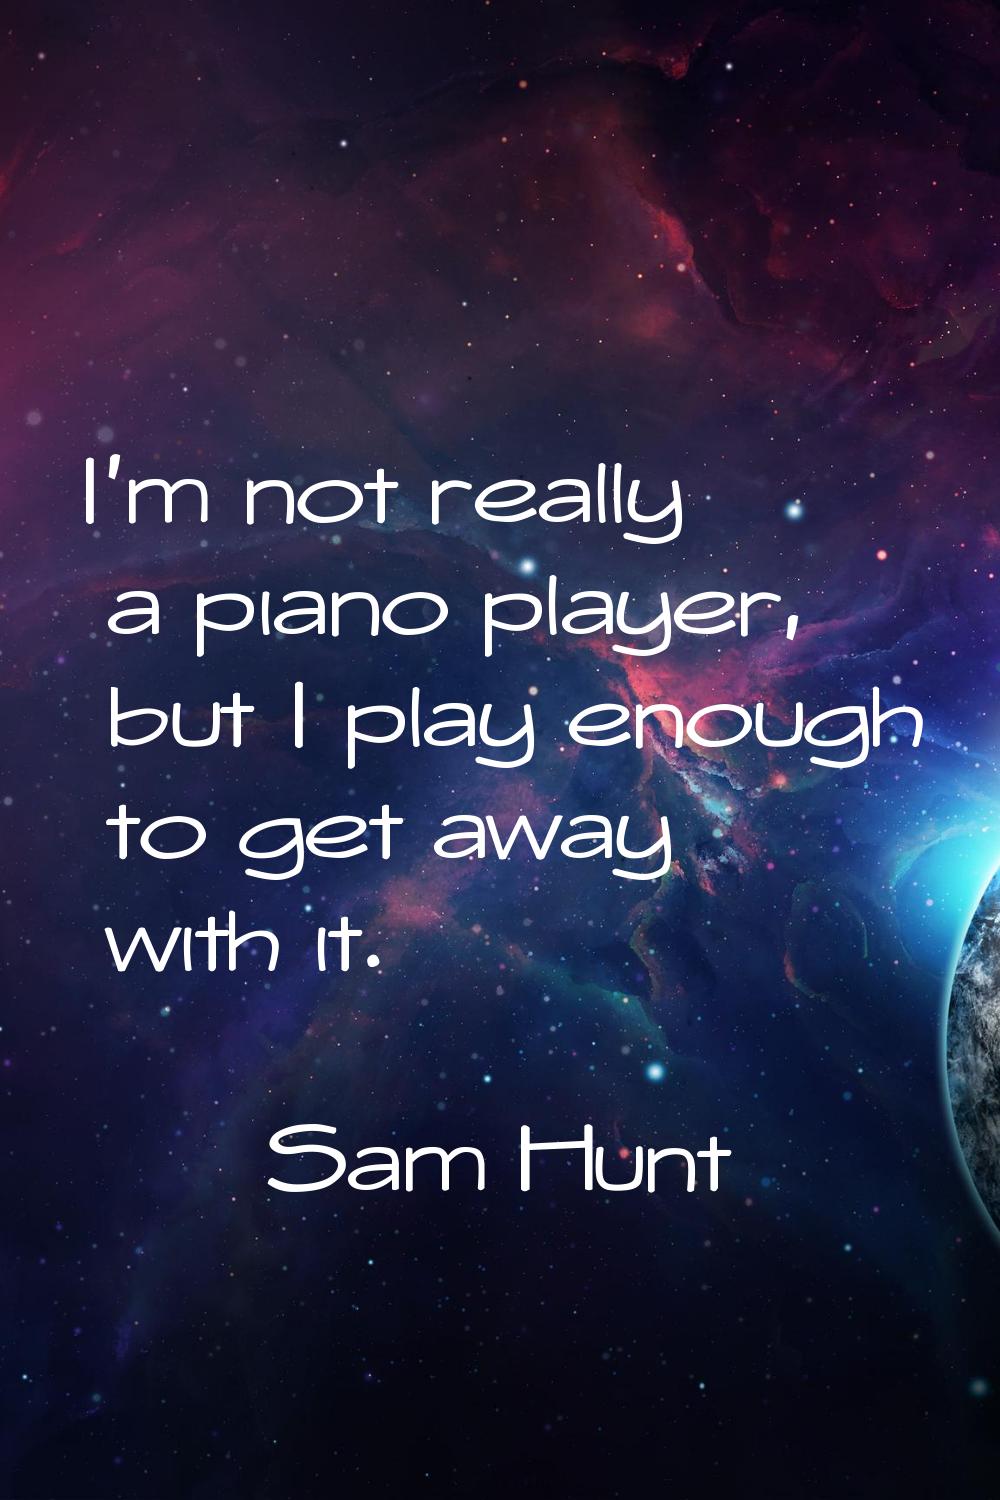 I'm not really a piano player, but I play enough to get away with it.